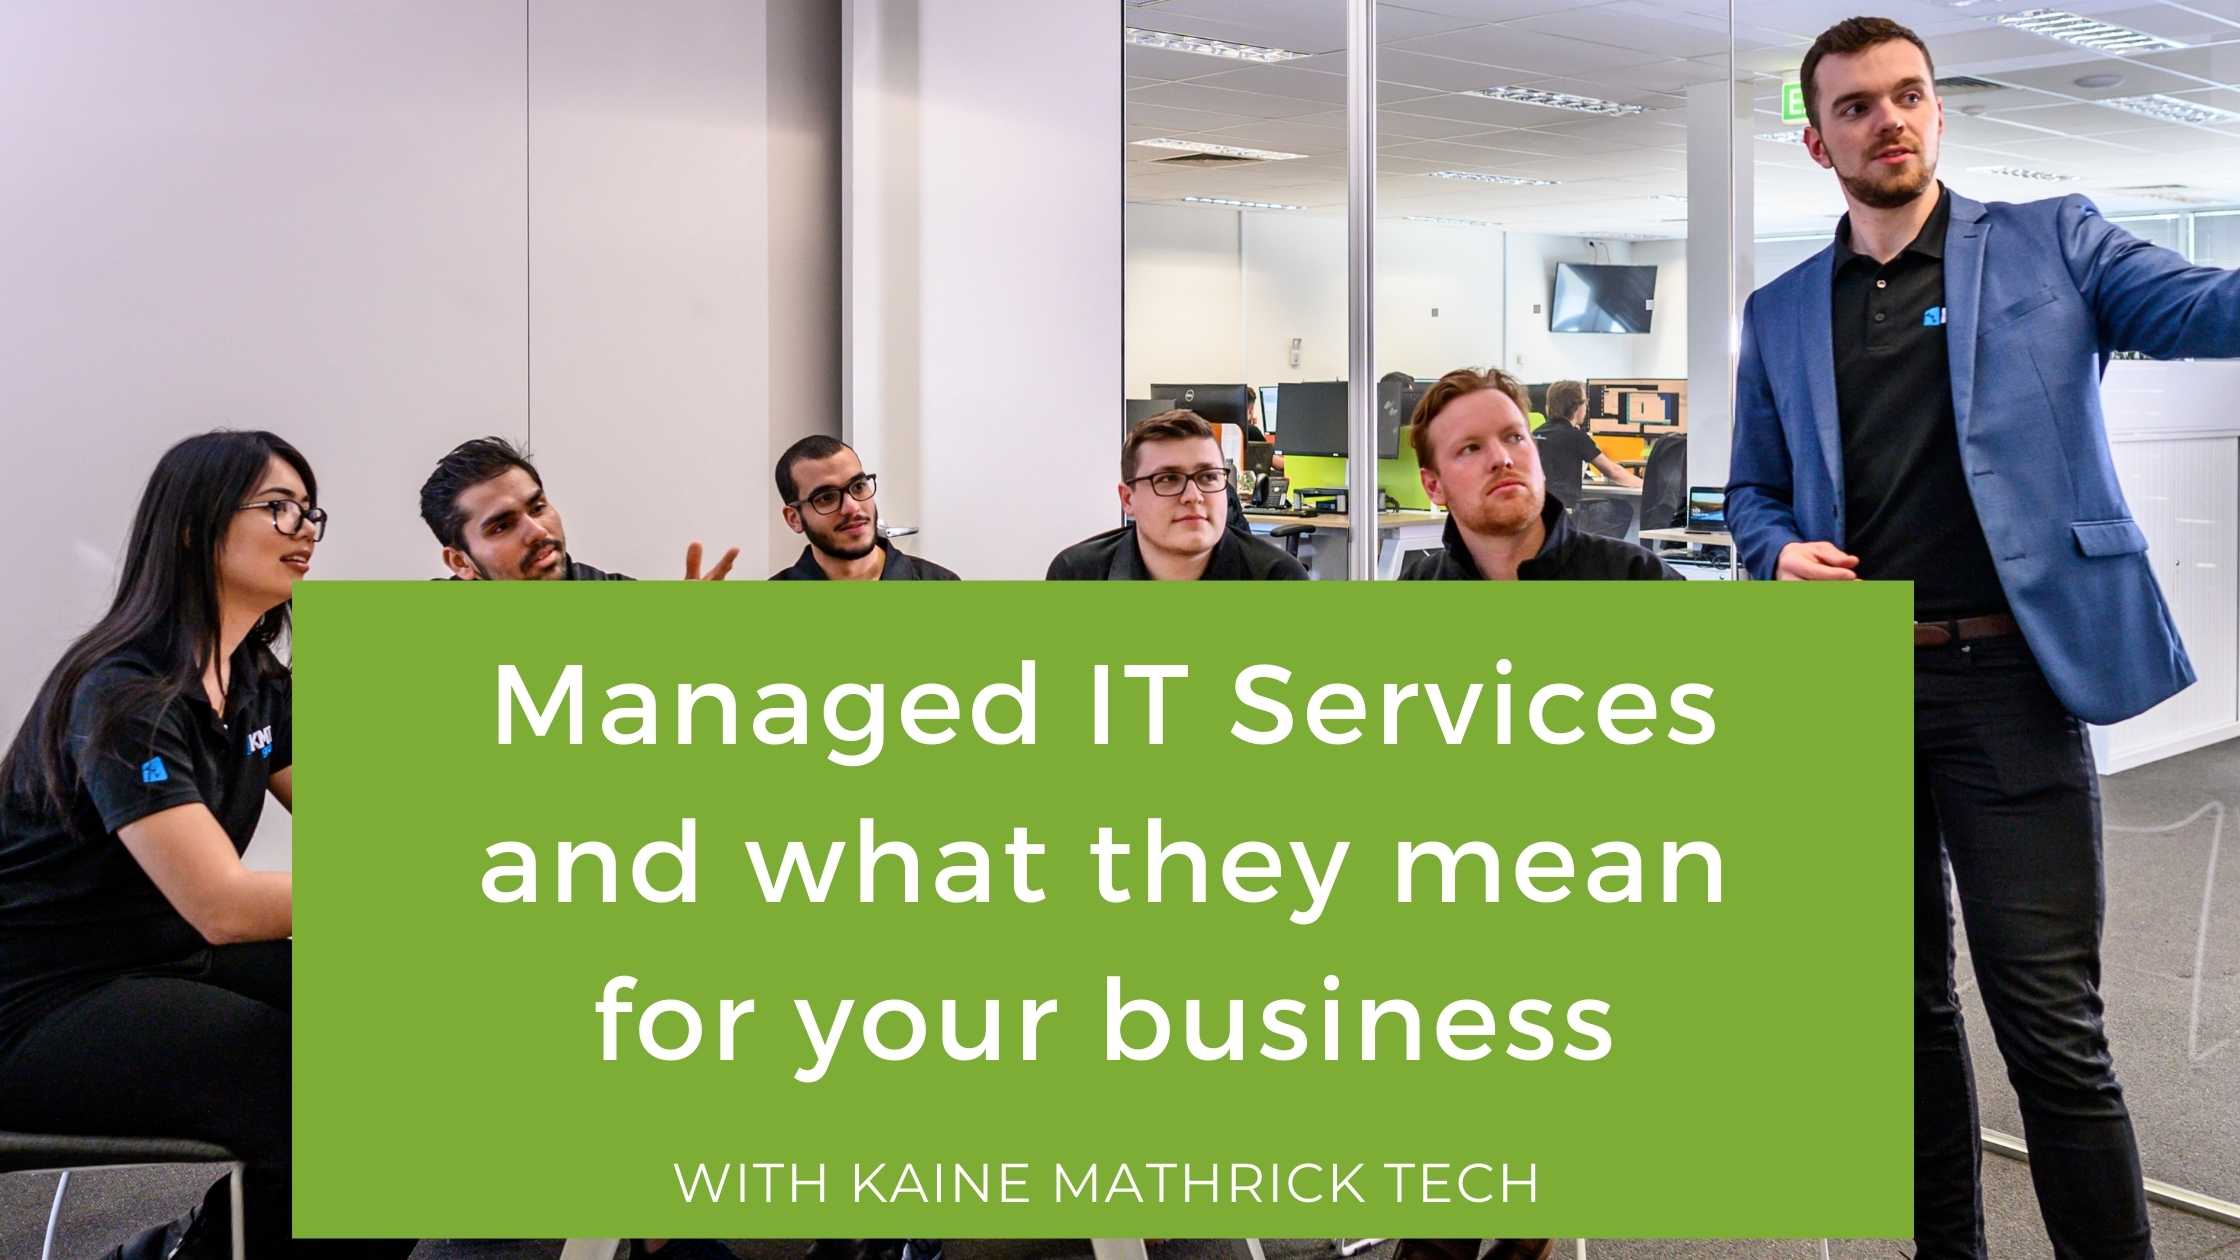 Managed IT Support Services and what they mean for your business